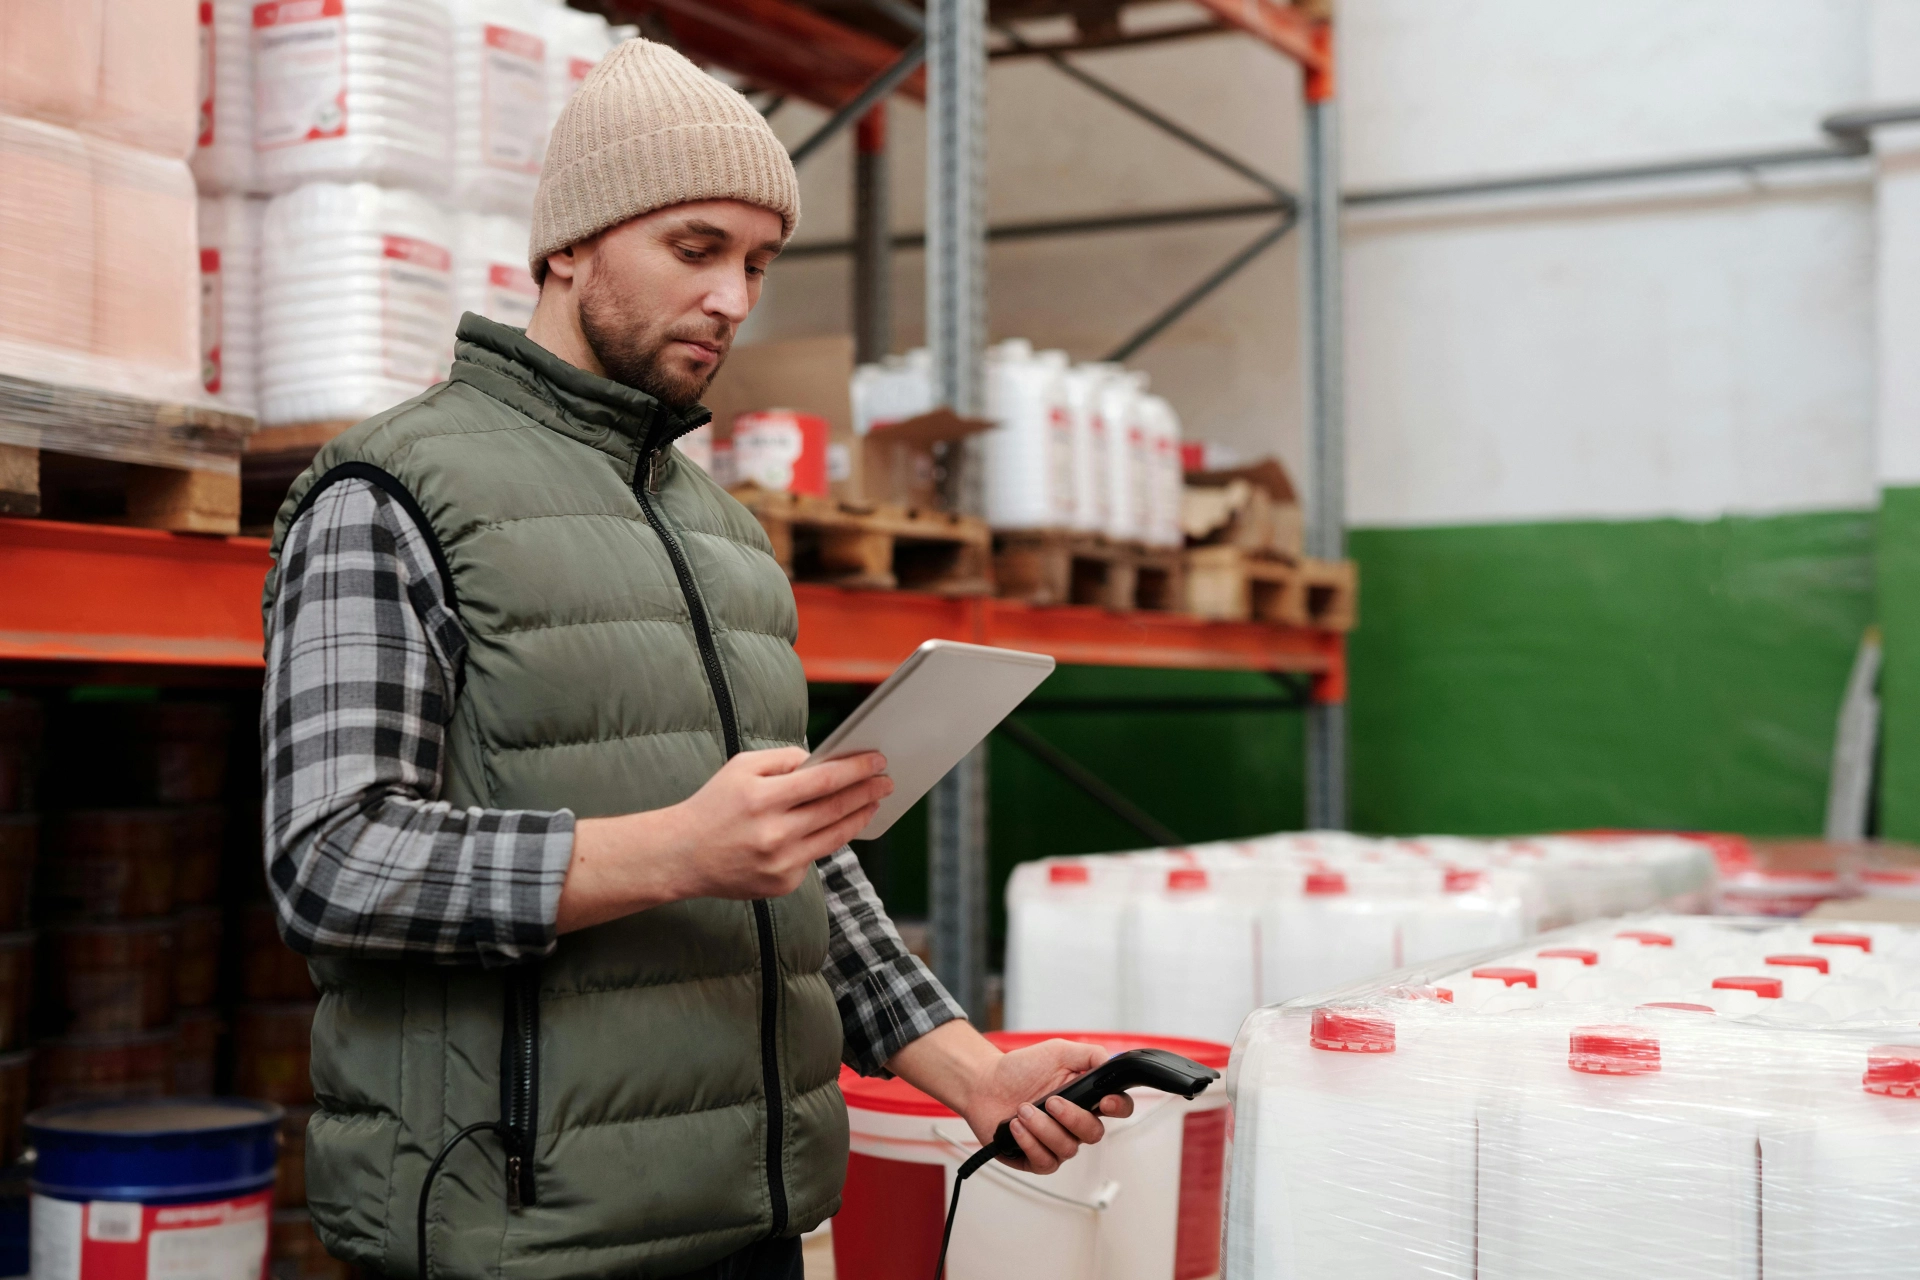 A warehouse worker holding a tablet device and scanning items